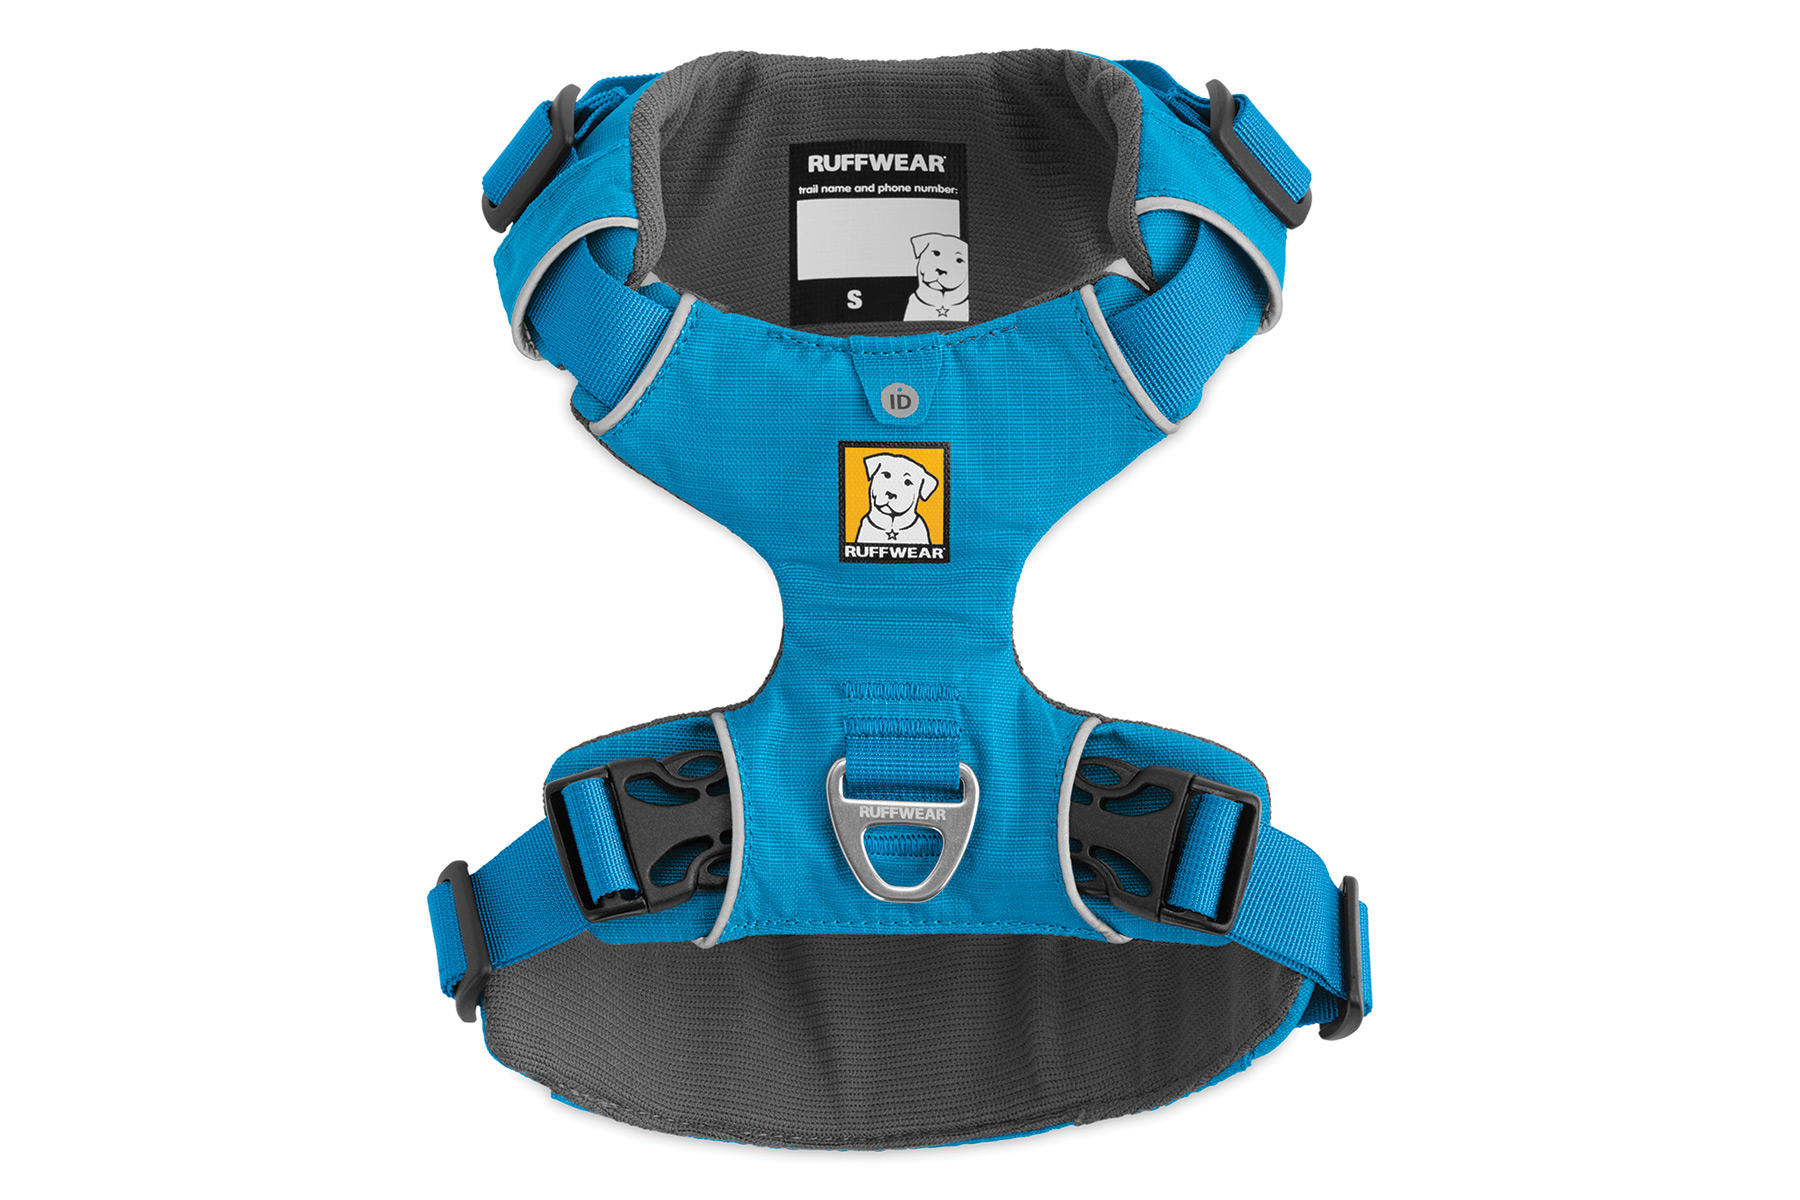 Ruffwear Front Range Harness For Dogs Top View